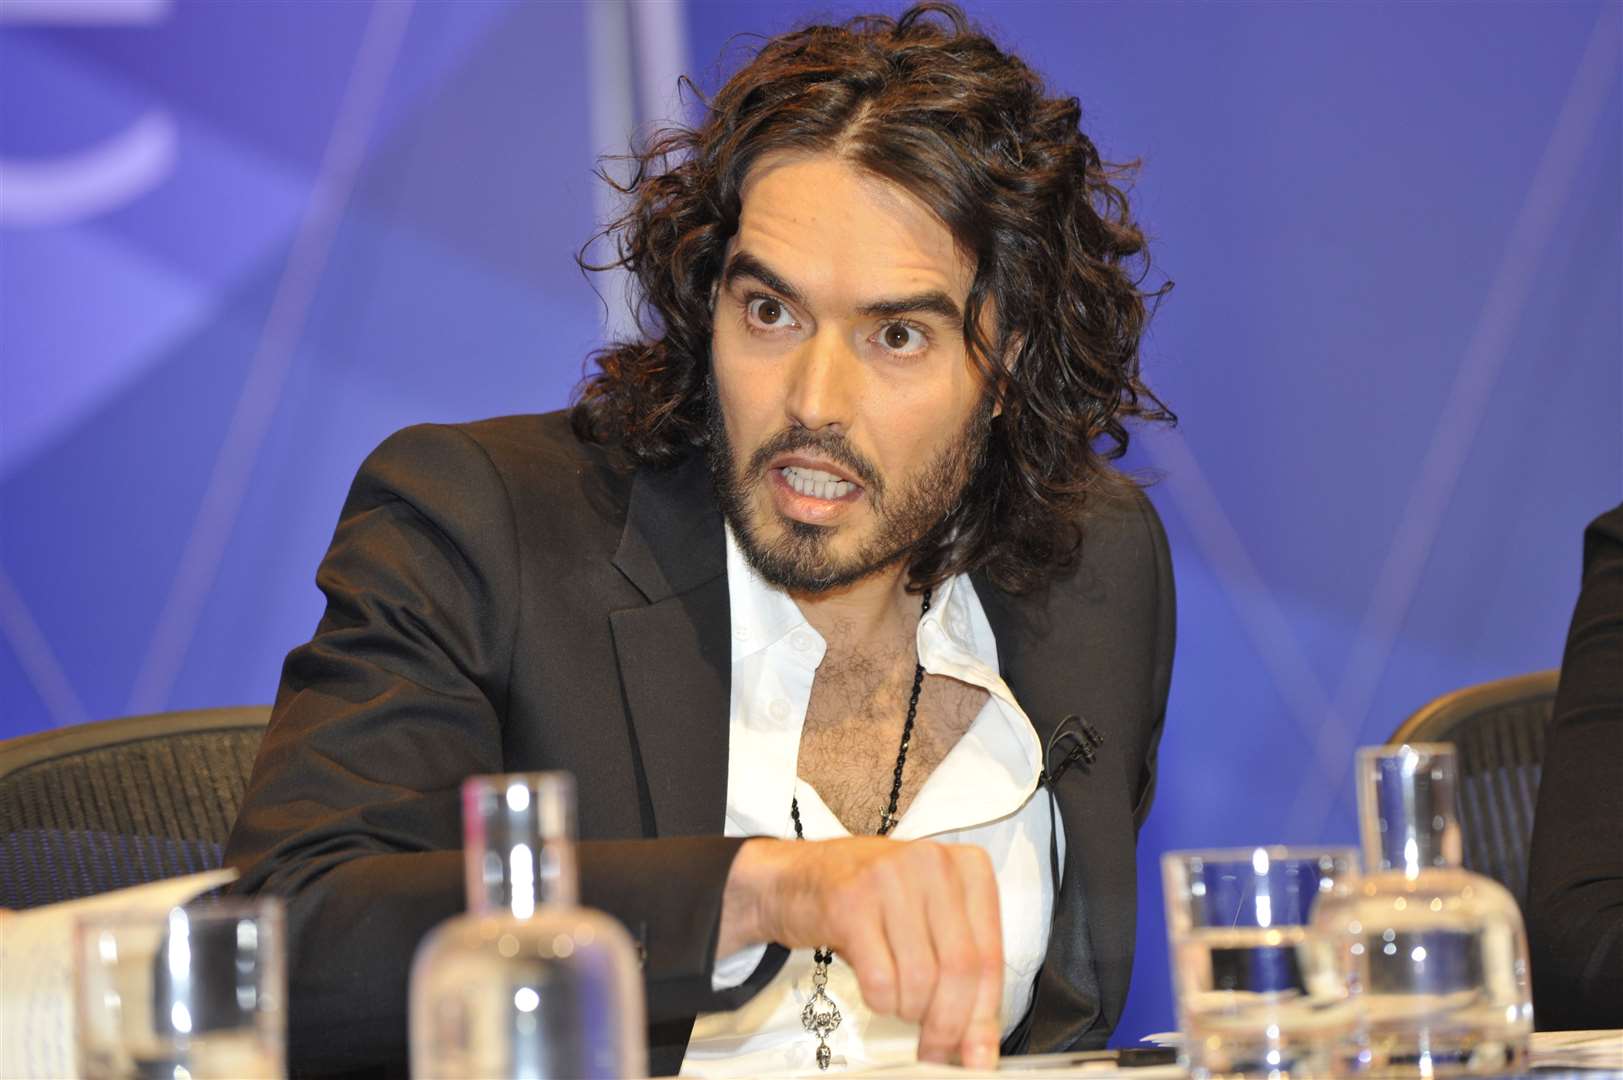 Russell Brand also features